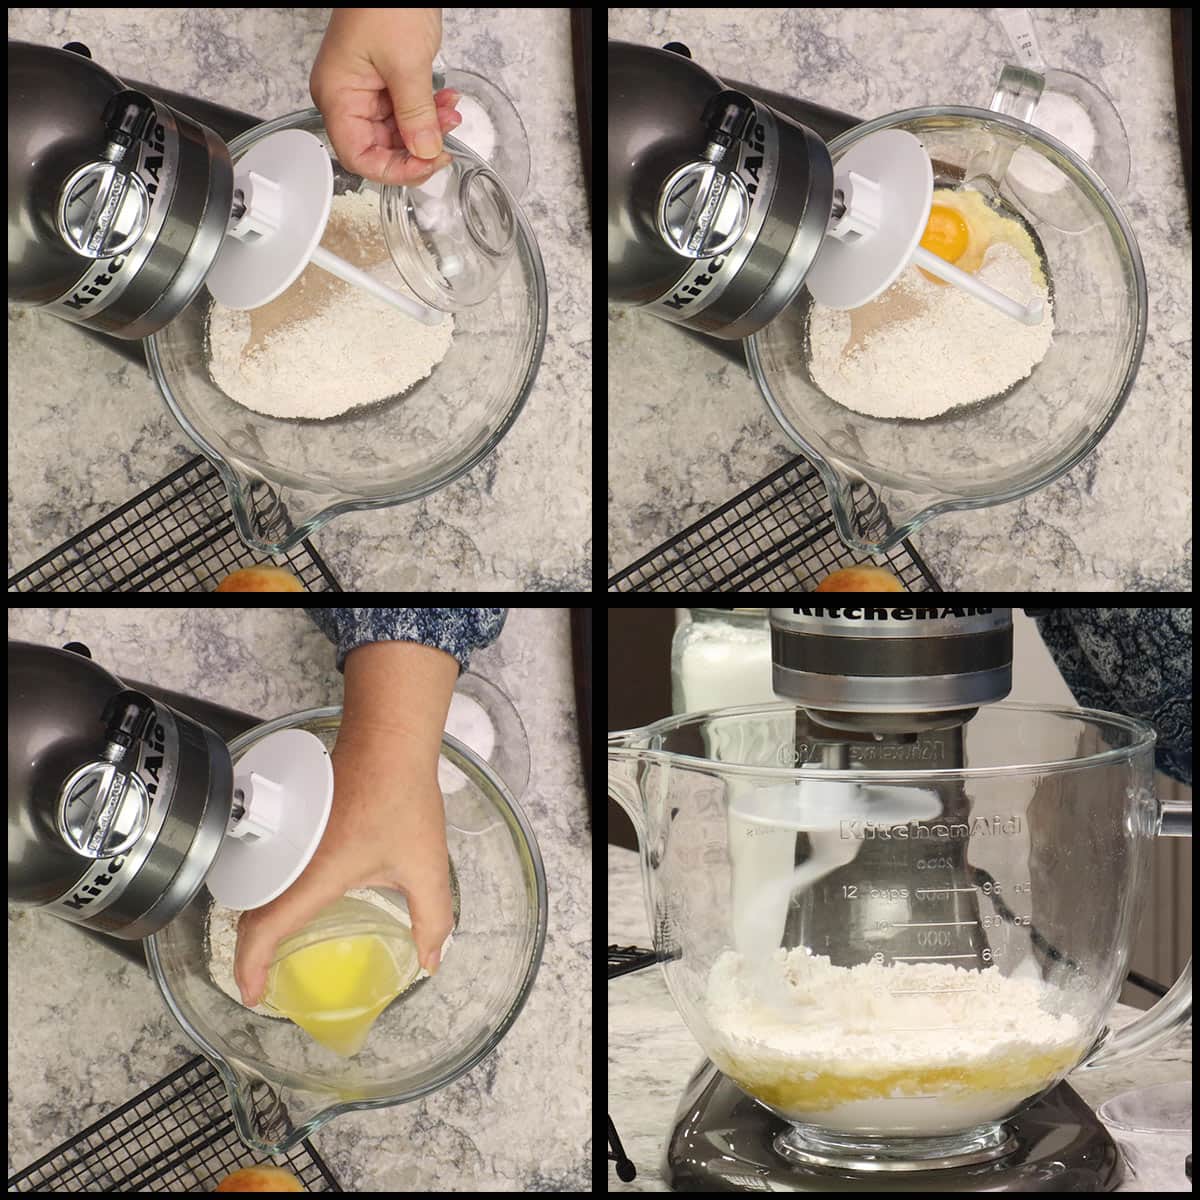 Mixing the yeast, flour, butter, salt, and egg in a stand mixer.